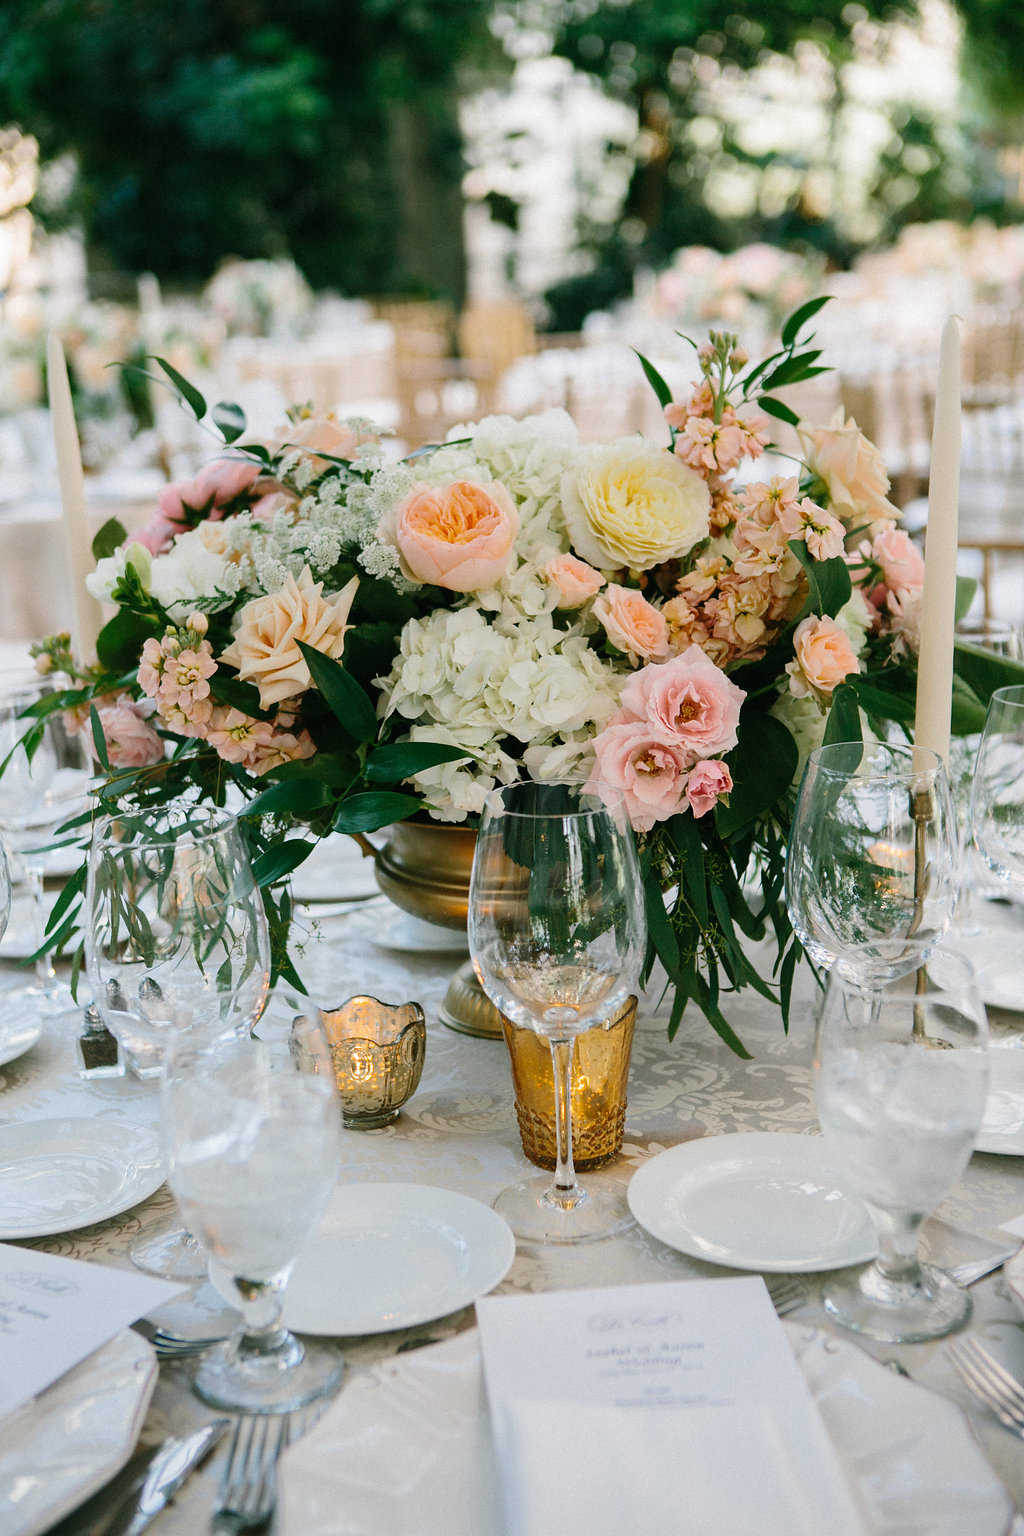 La Caille Wedding | Portuguese Inspired Wedding | Michelle Leo Events | Utah Event Planner and Designer | Jacque Lynn Photography 